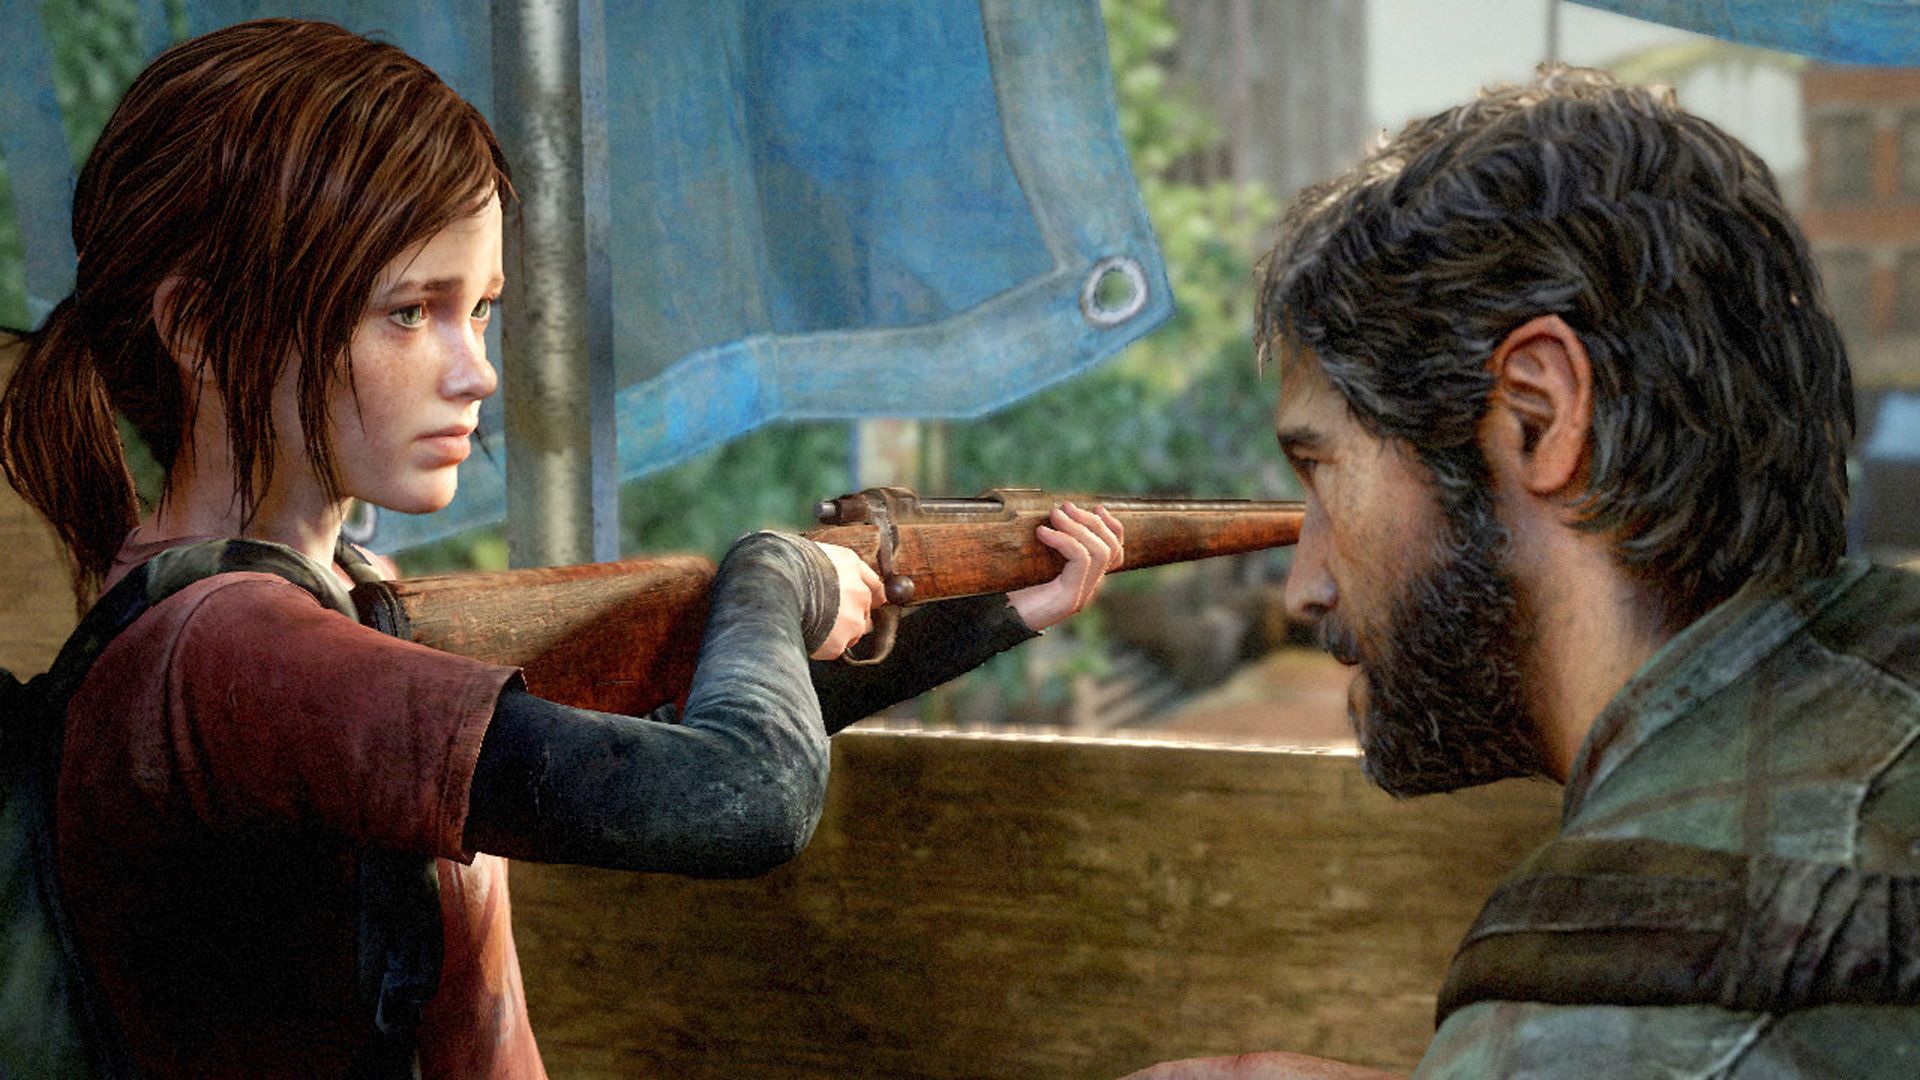 She to live there last year. The last of us 2013 Элли и Джоэл. Джоэл the last of us 1.